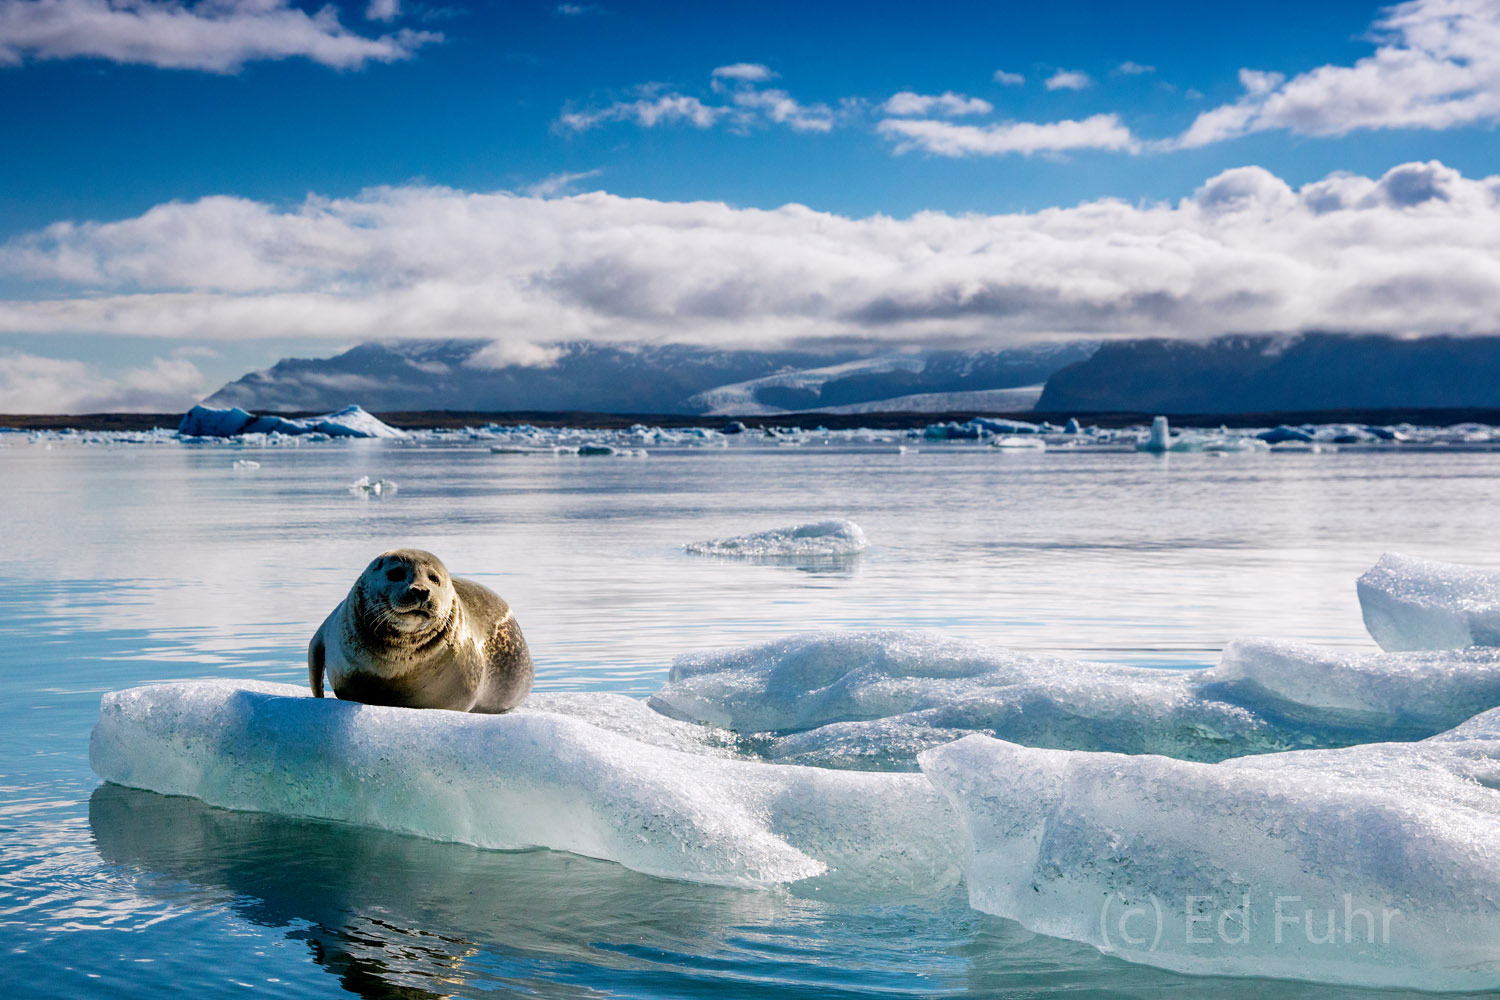 A seal warms itself on an iceberg after fishing in the frigid but rich waters of Jokulsarlon Lagoon.